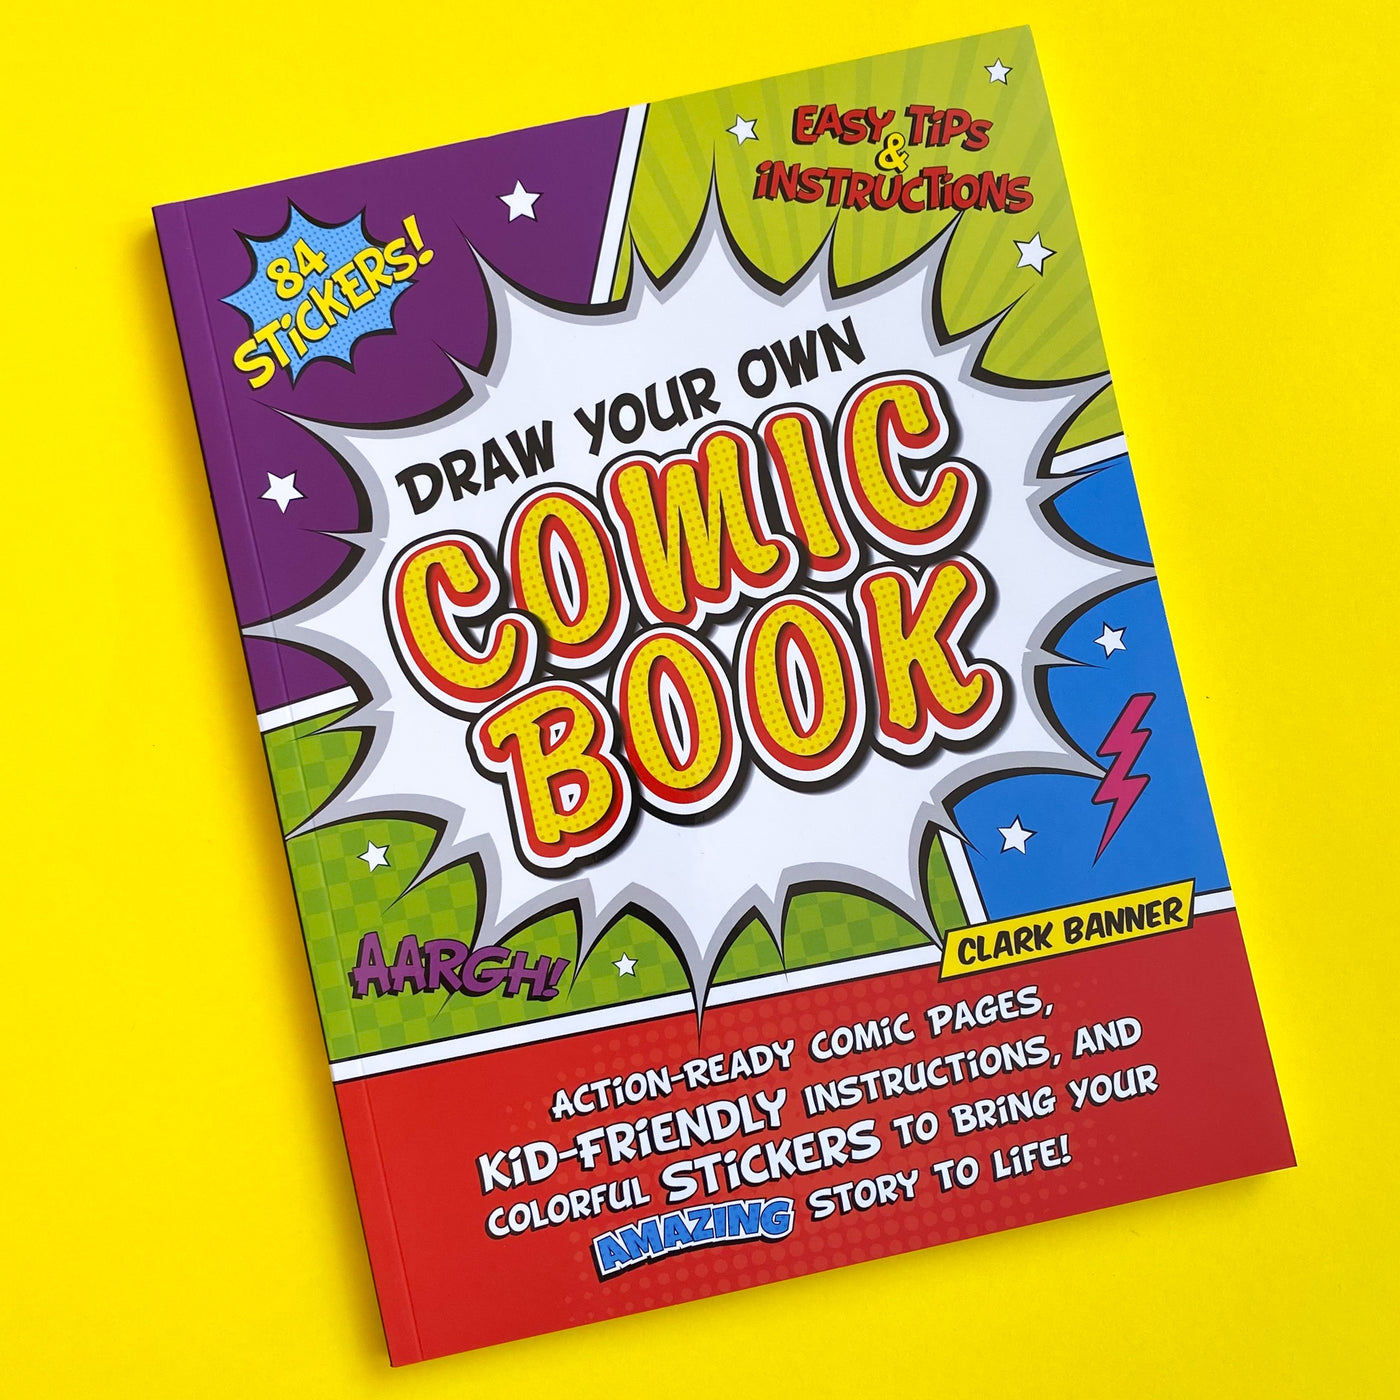 Draw Your Own Comic Book by Clark Banner – Collage Collage